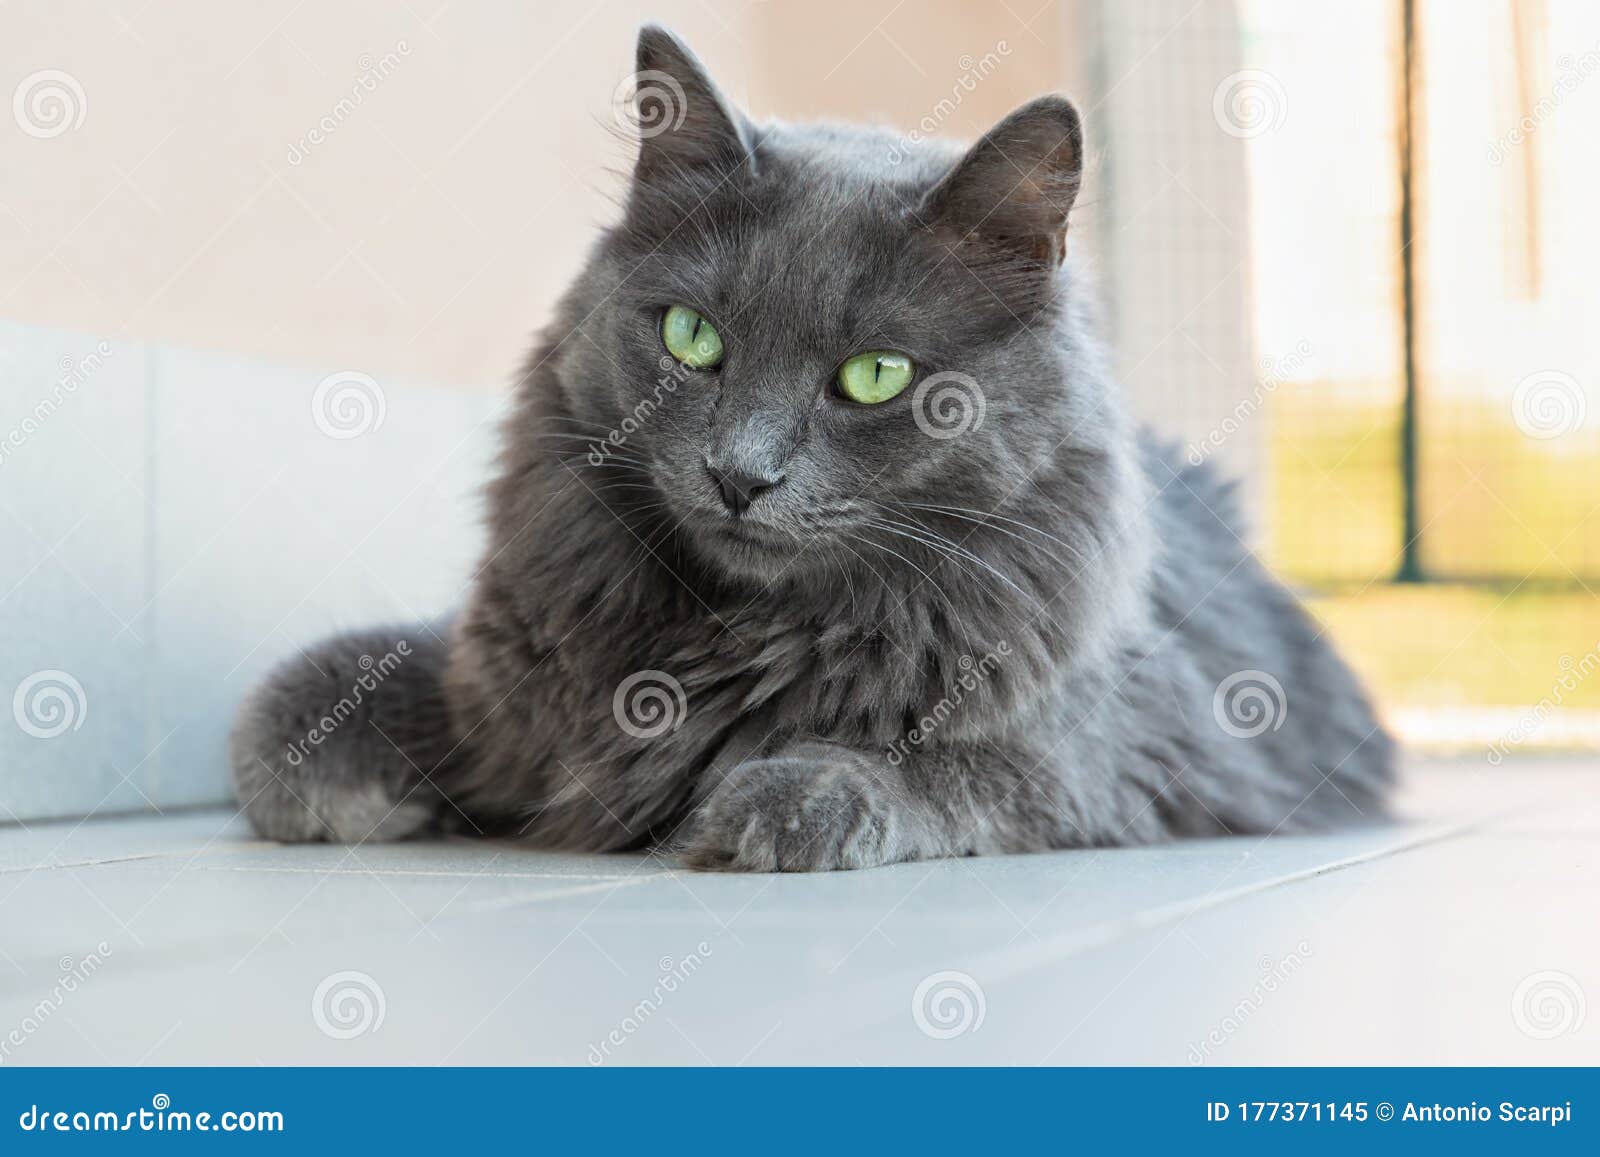 43++ Nebelung cat nature Funny Cats